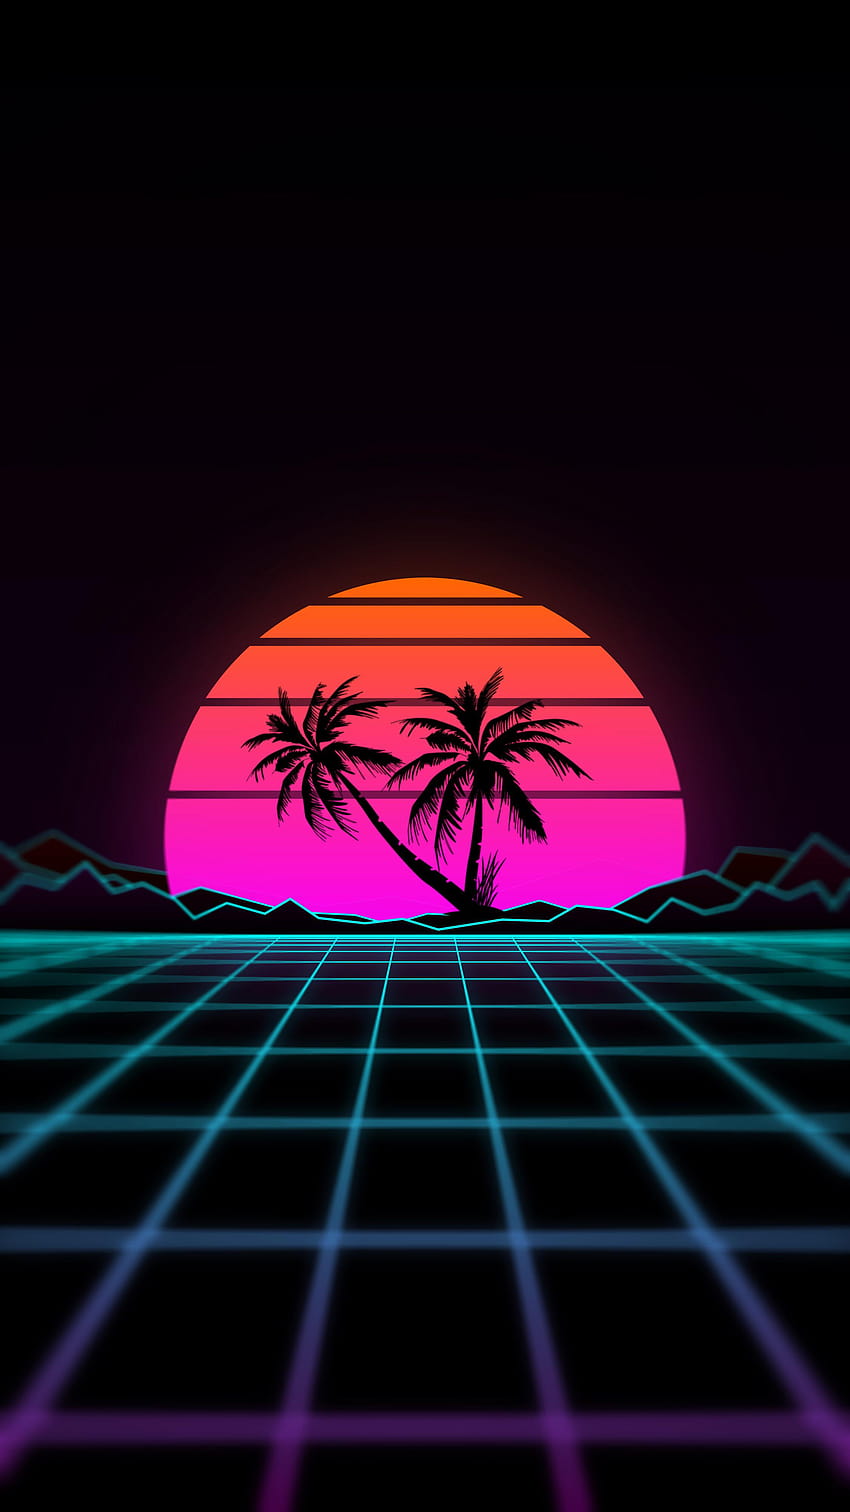 Got sick of my previous , but couldn't find one with the exact composition I wanted, so I tried making my own stereotypical Outrun HD phone wallpaper